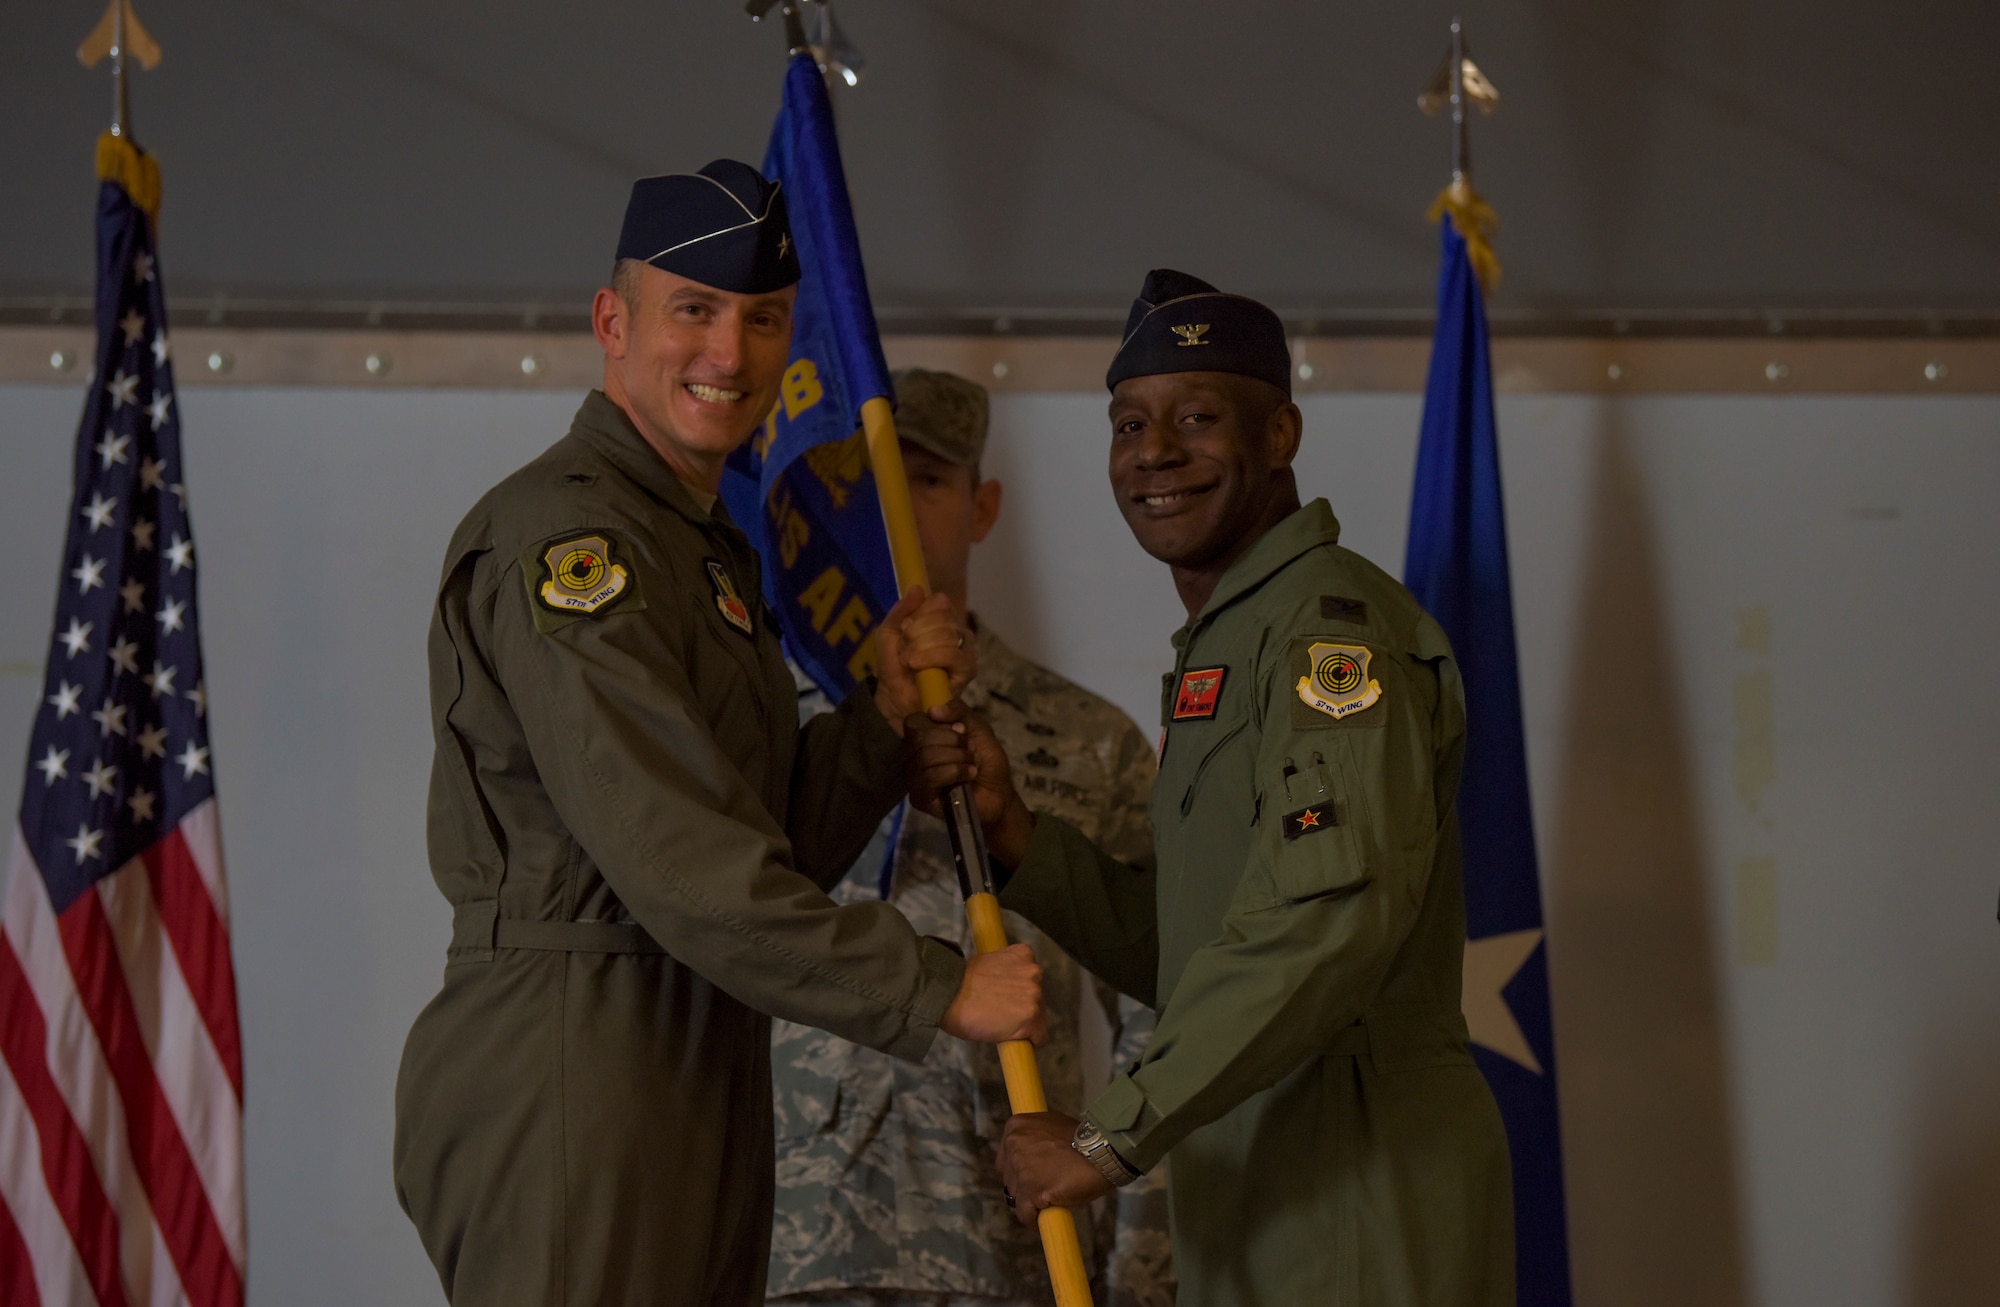 Brig. Gen. Robert Novotny, 57th Wing commander, passes the guidon to Col. Travolis Simmons, 57th Adversary Tactics Group incoming commander, during a change of command ceremony at Nellis Air Force Base, Nevada, Aug. 3, 2018. The 57th ATG is made up of seven squadrons, including three geographically separated units. (U.S. Air Force photo by Airman 1st Class Andrew D. Sarver)